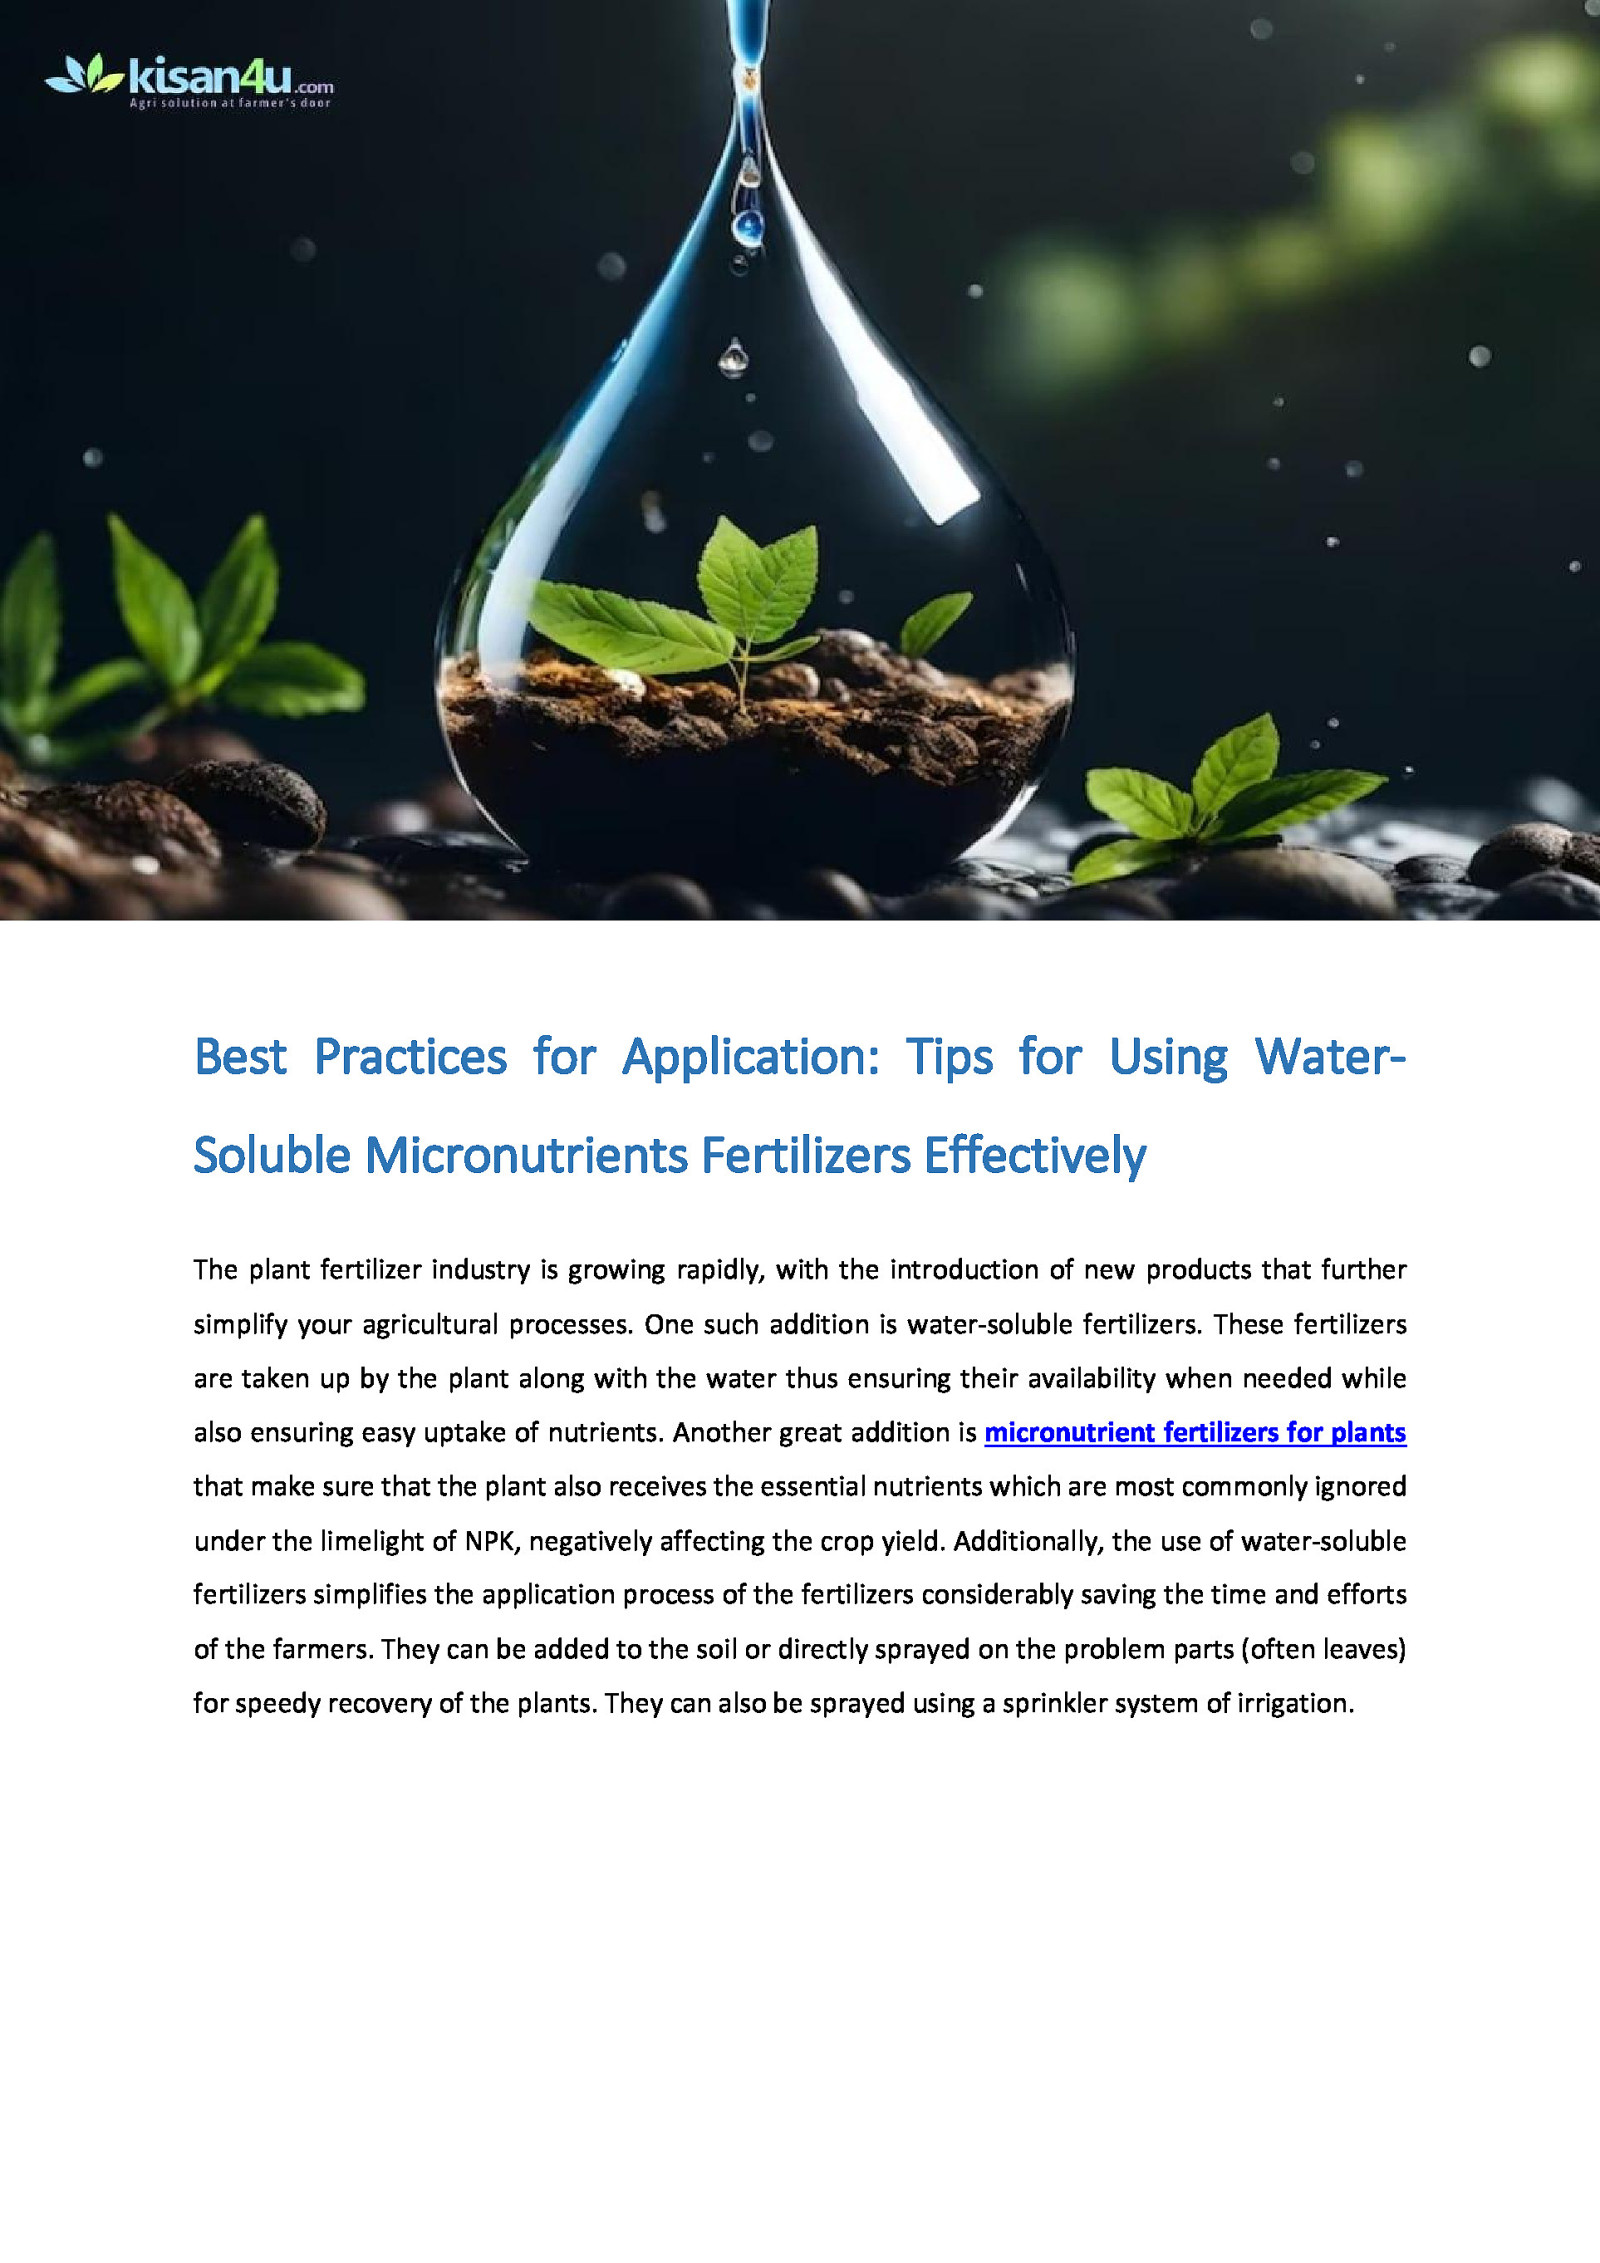 Best Practices for Application: Tips for Using Water-Soluble Micronutrients Fertilizers Effectively